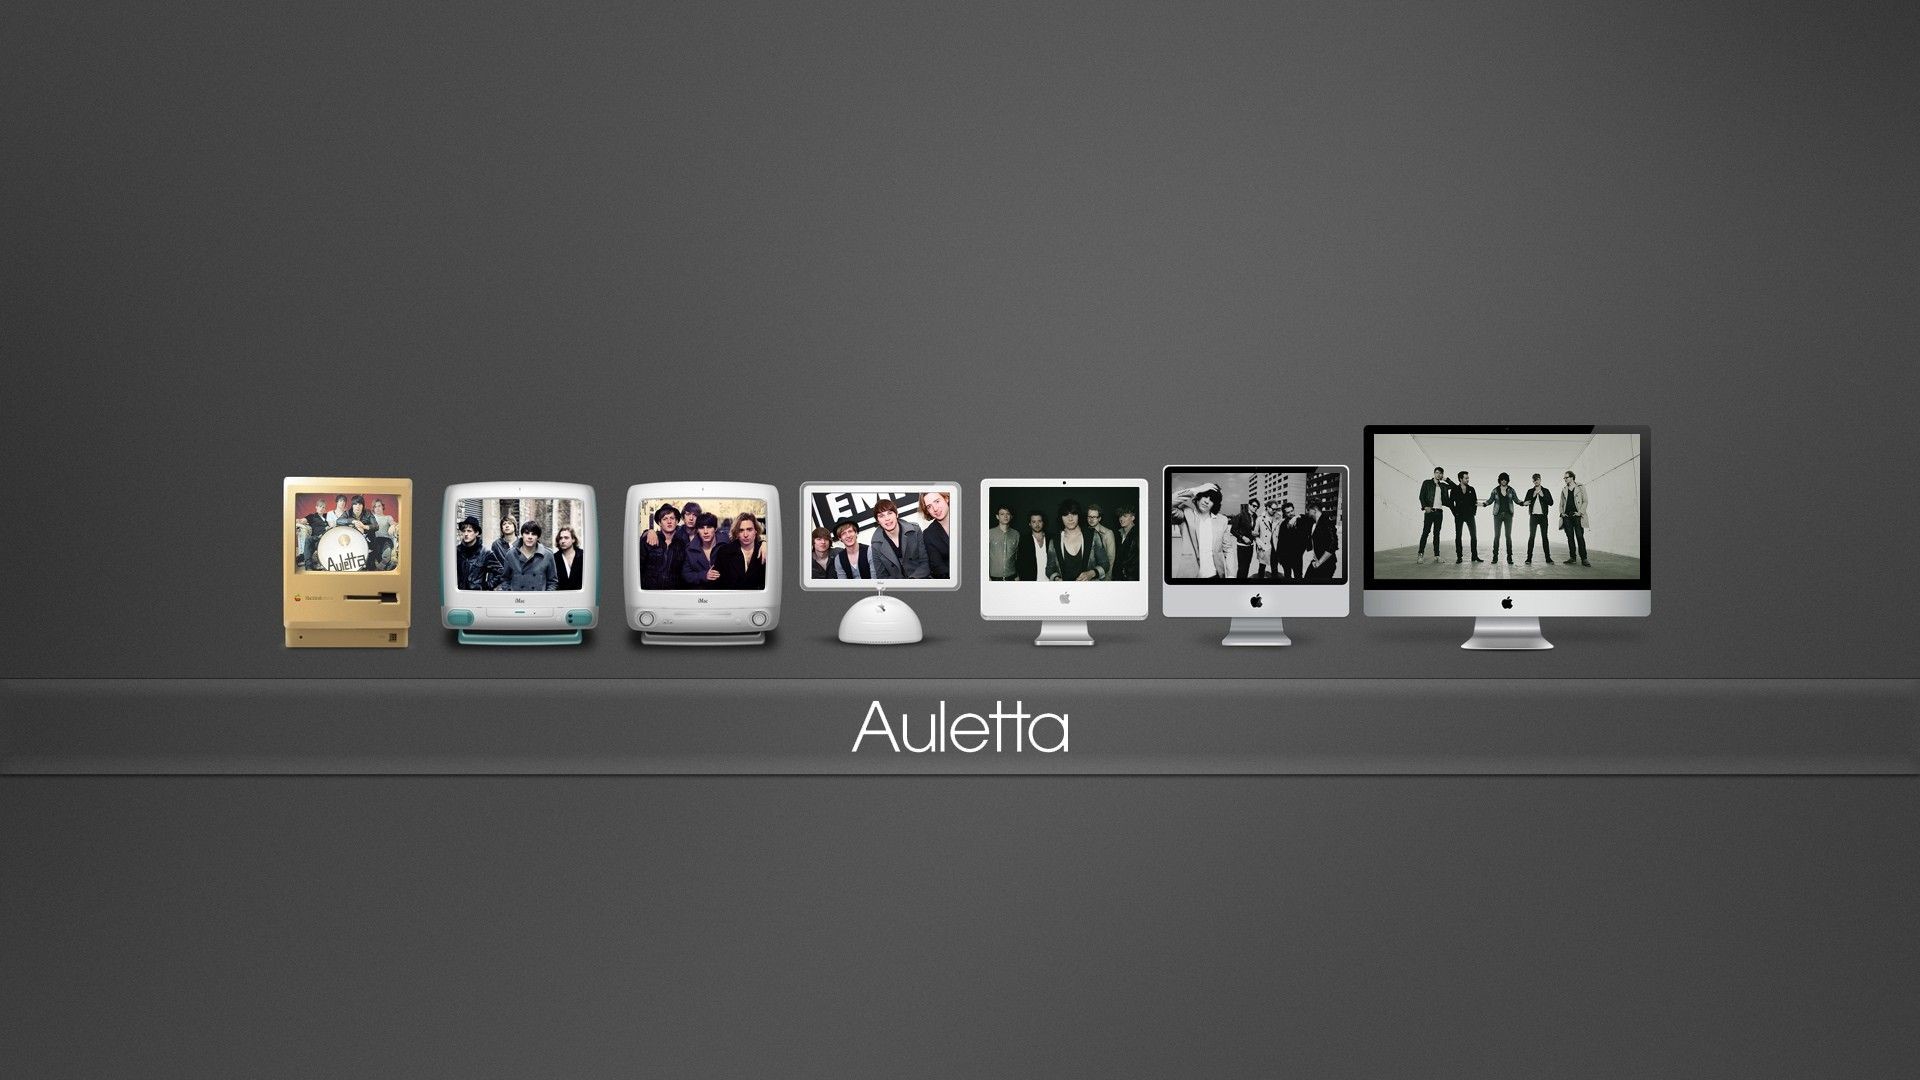 1920x1080 rock, historical, indie, Rock Band, Apple, Auletta :: Wallpapers